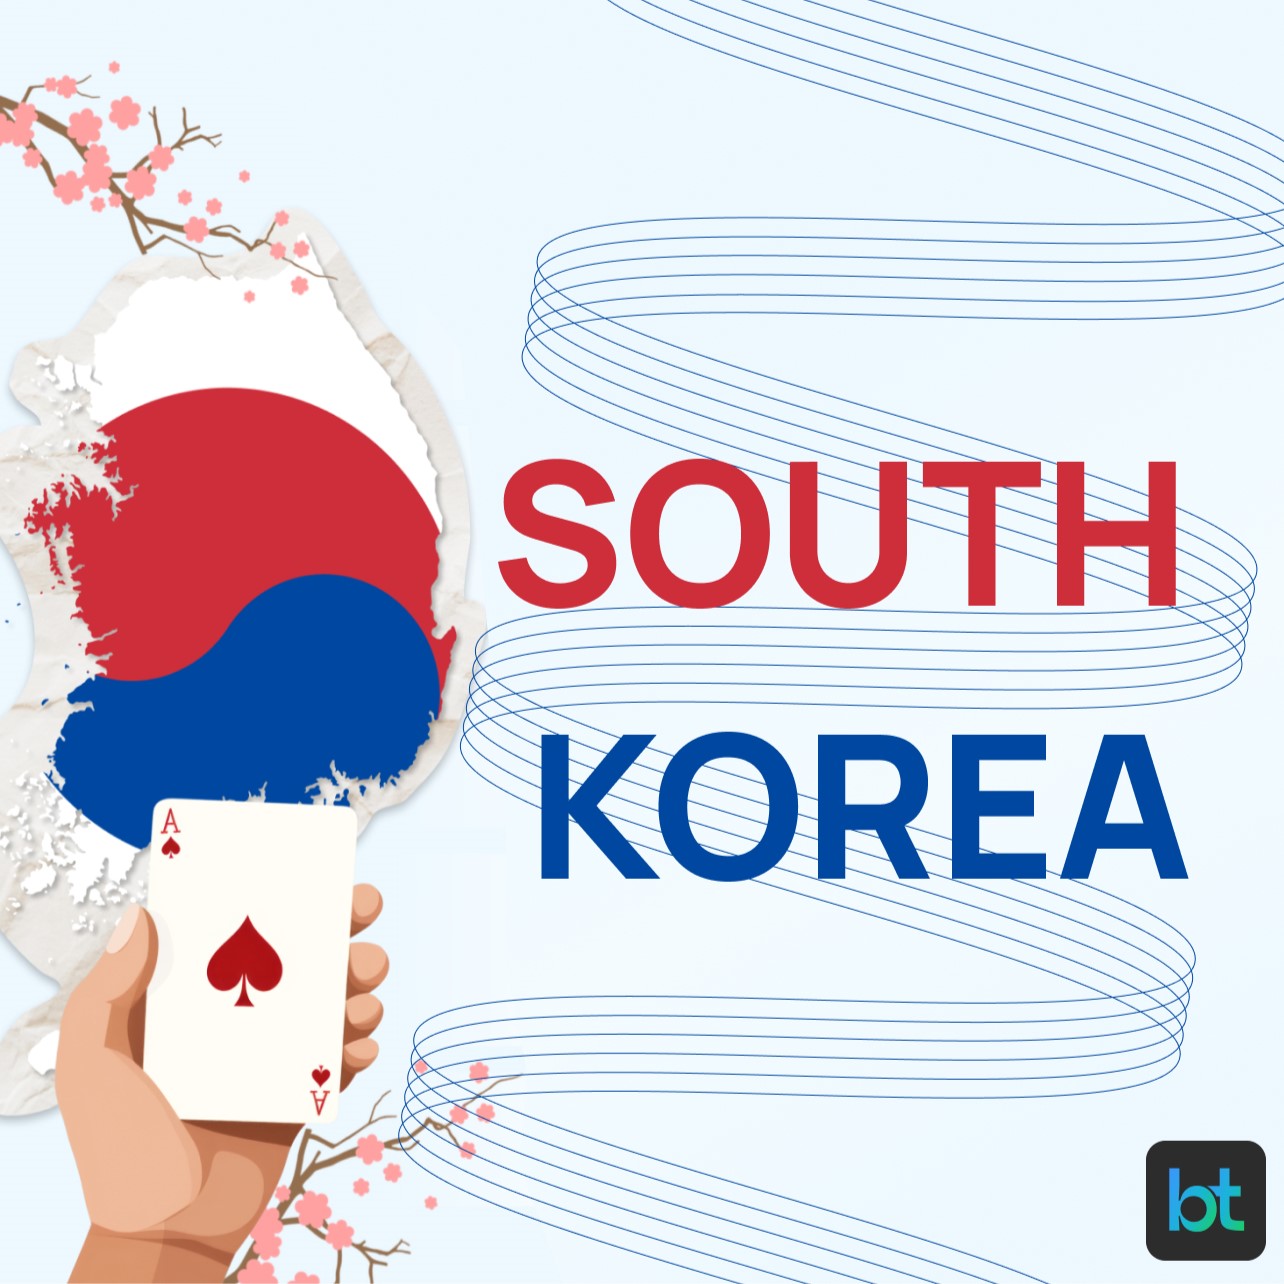 We have launched a new geographies – South Korea. Accepting payments in fiat and cryptocurrencies